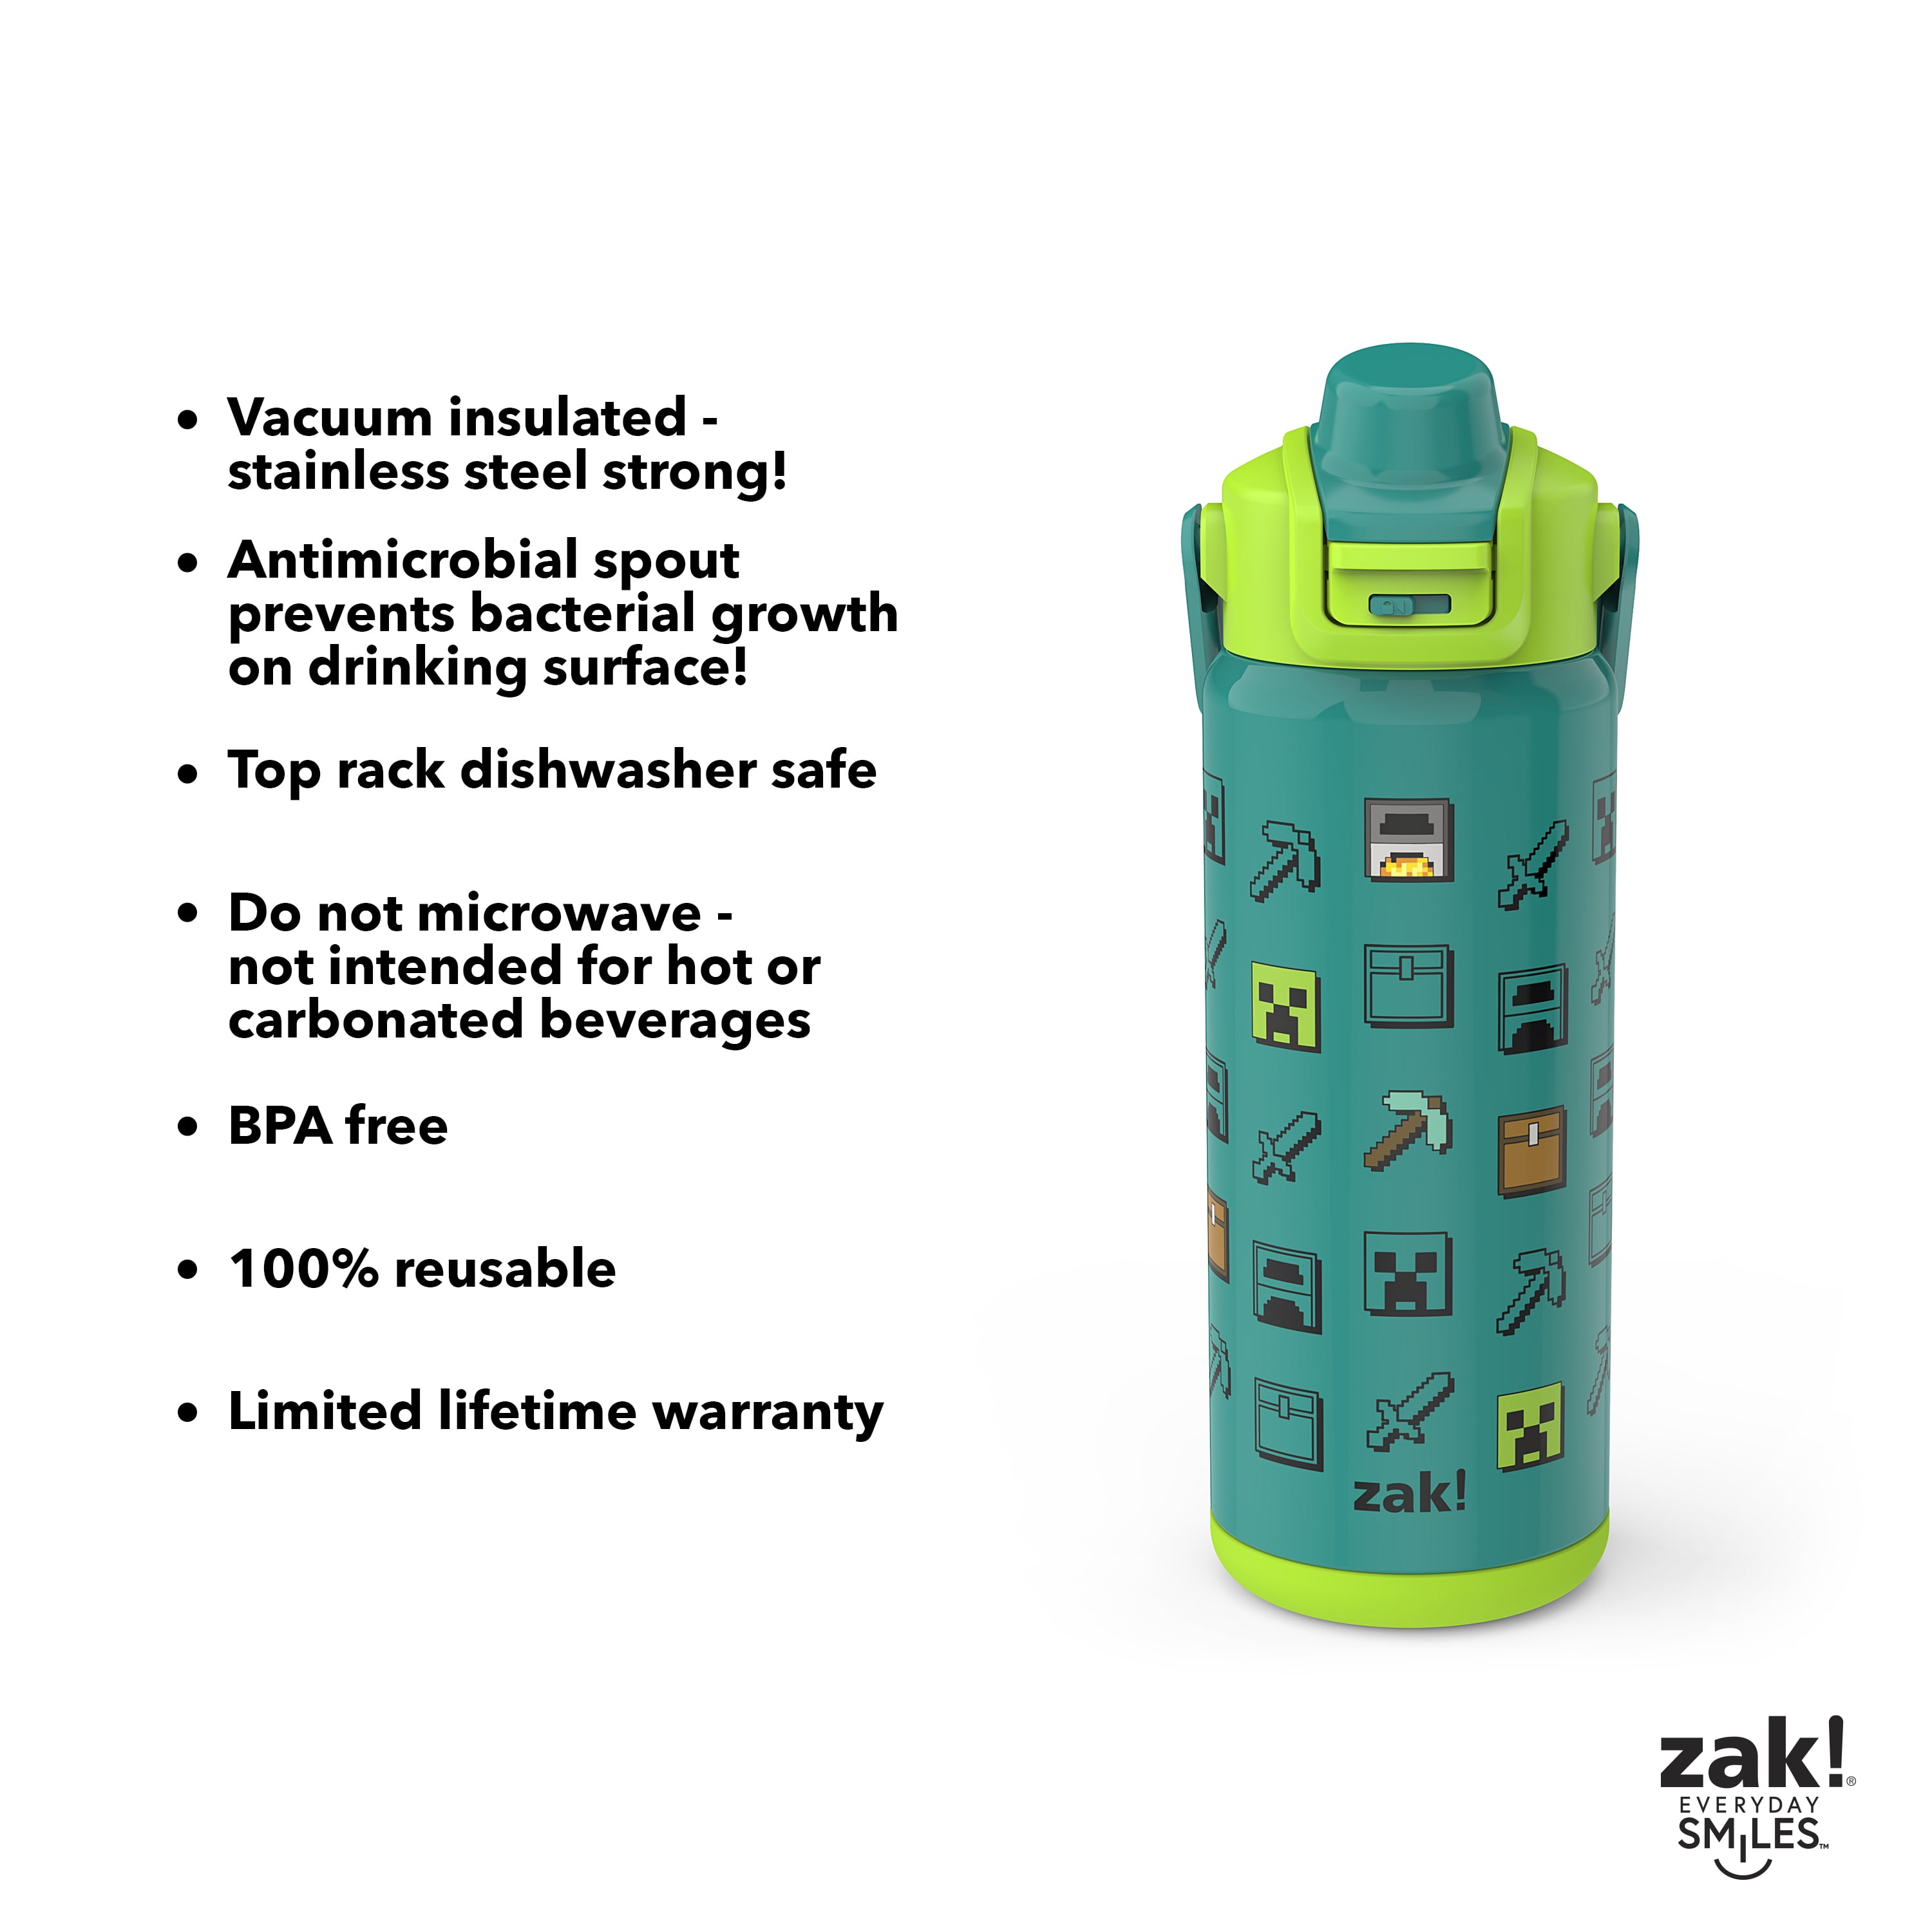 Minecraft 24 ounce Vacuum Insulated Stainless Steel Water Bottle, Video  Games 